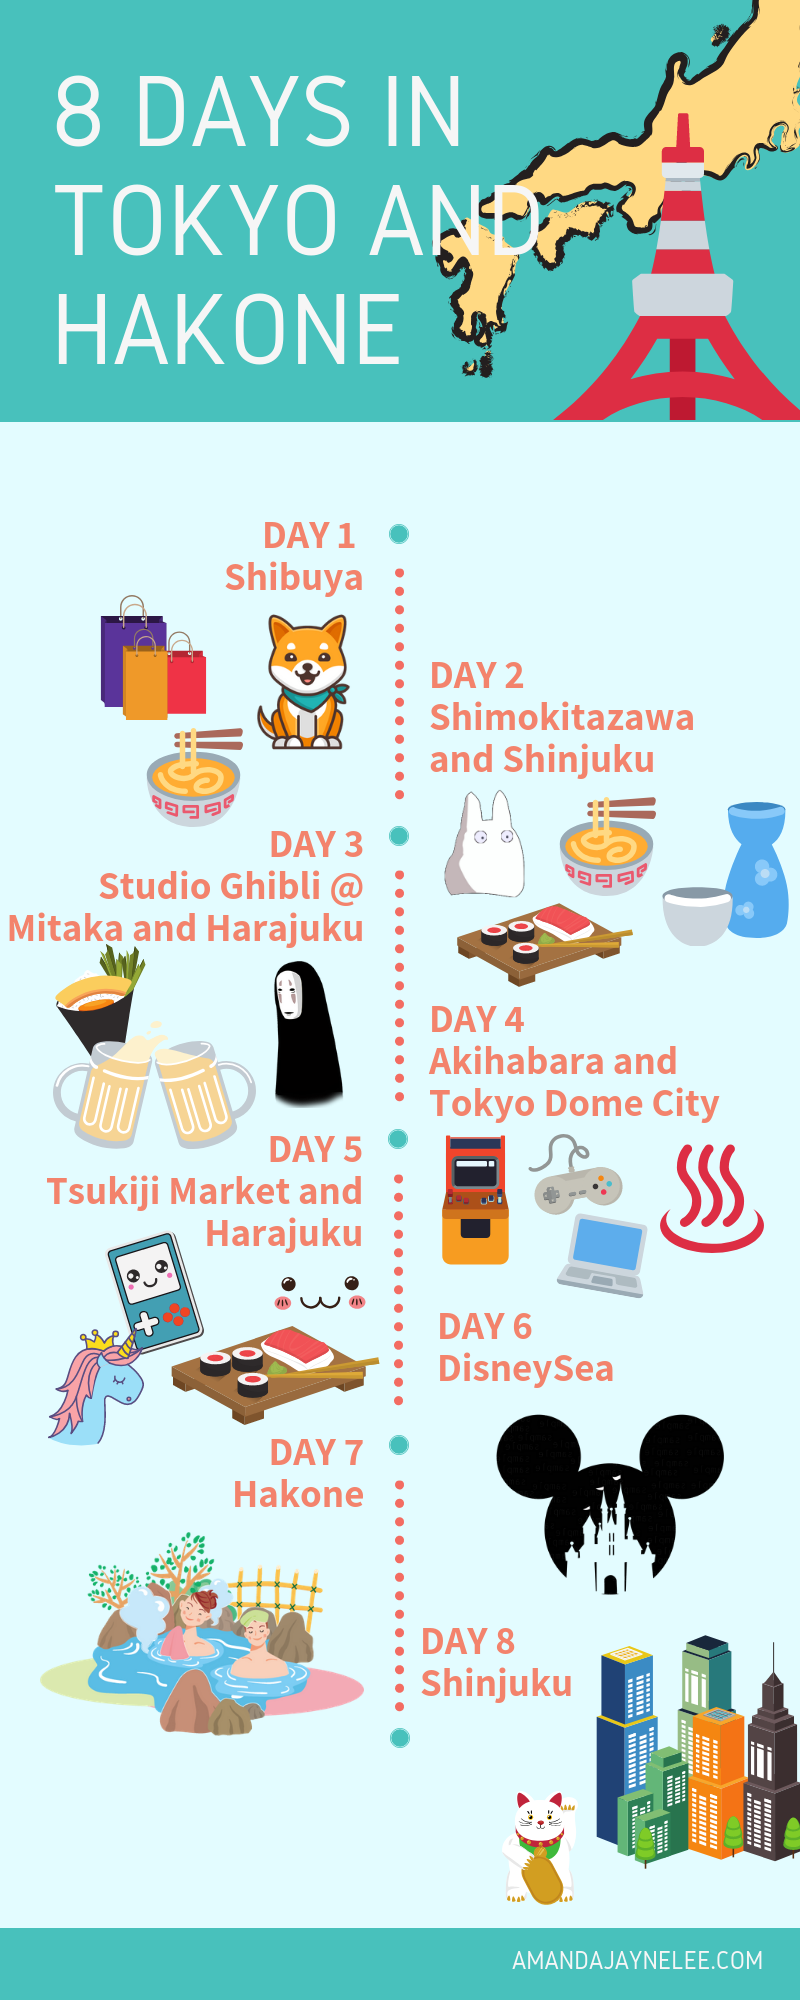 8 days in tokyo and hakone infographic